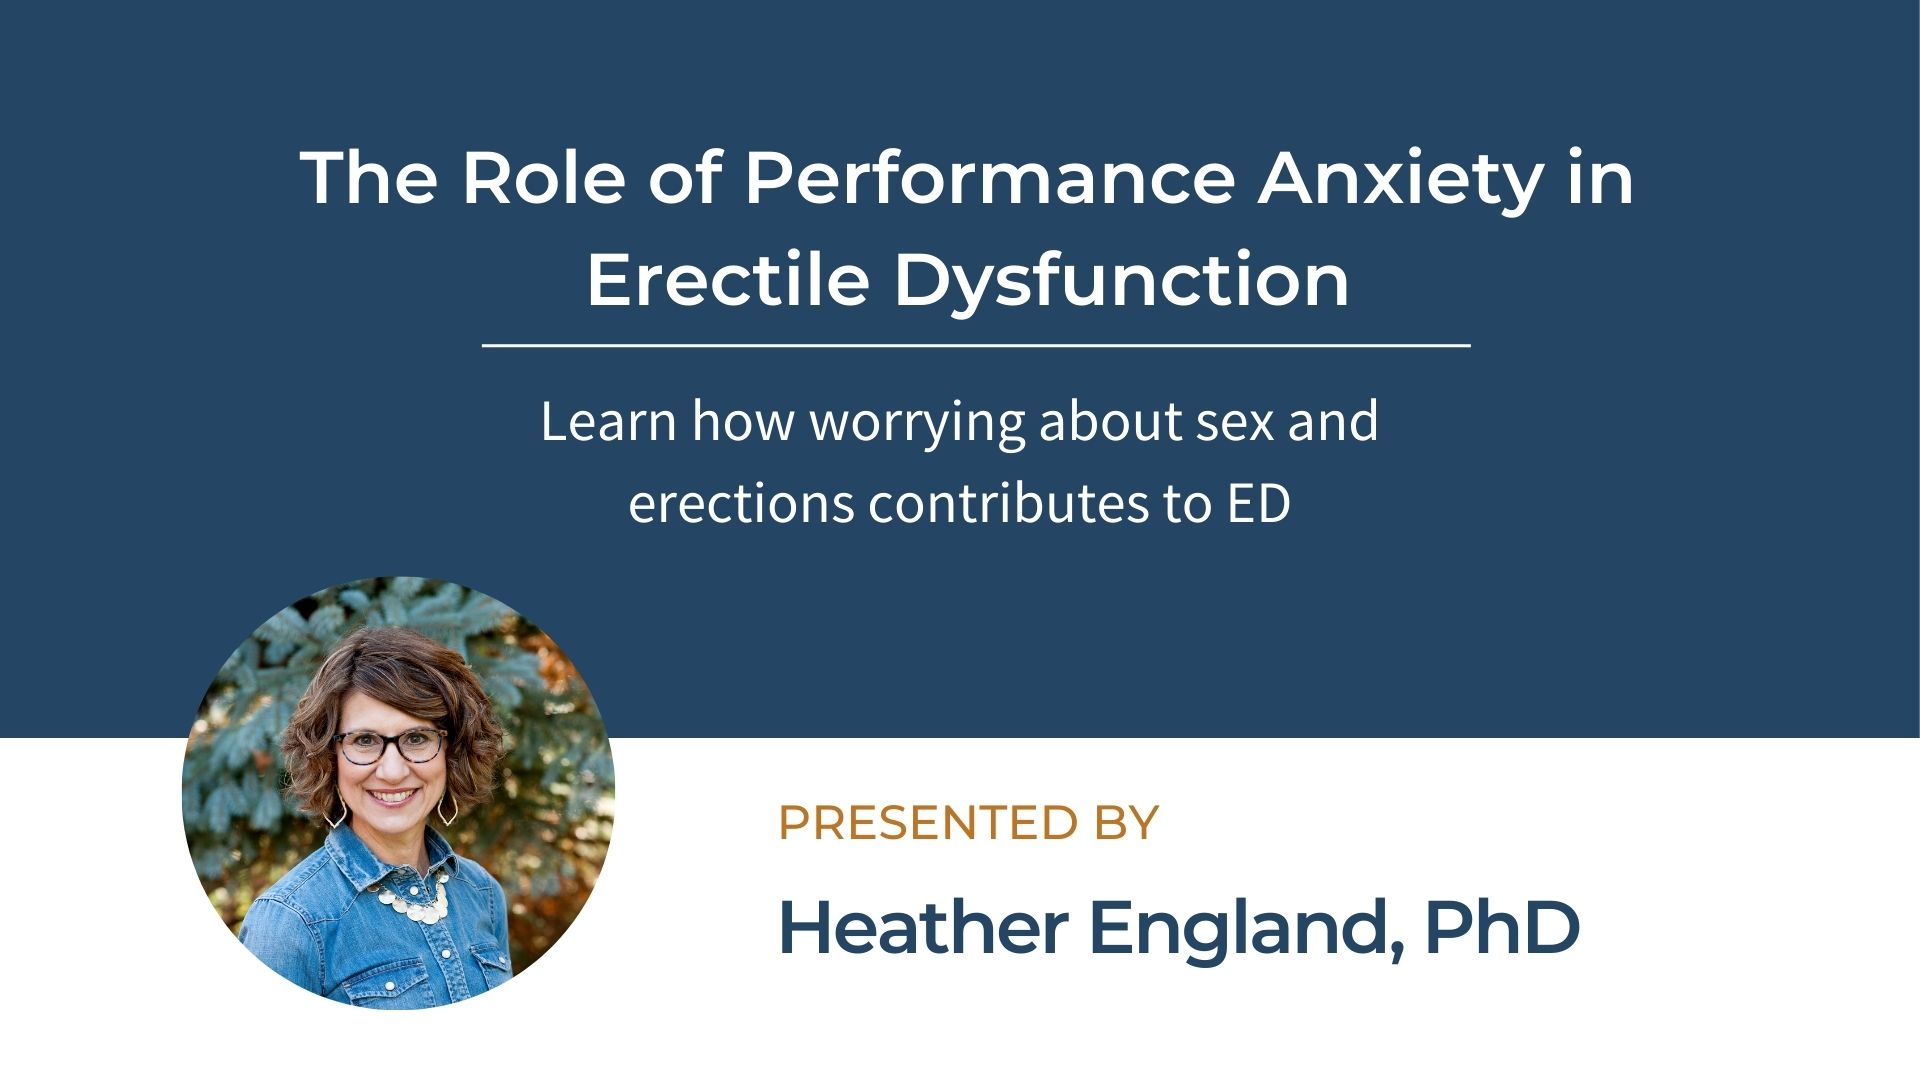 The ROle of performance anxiety in erectile dysfunction